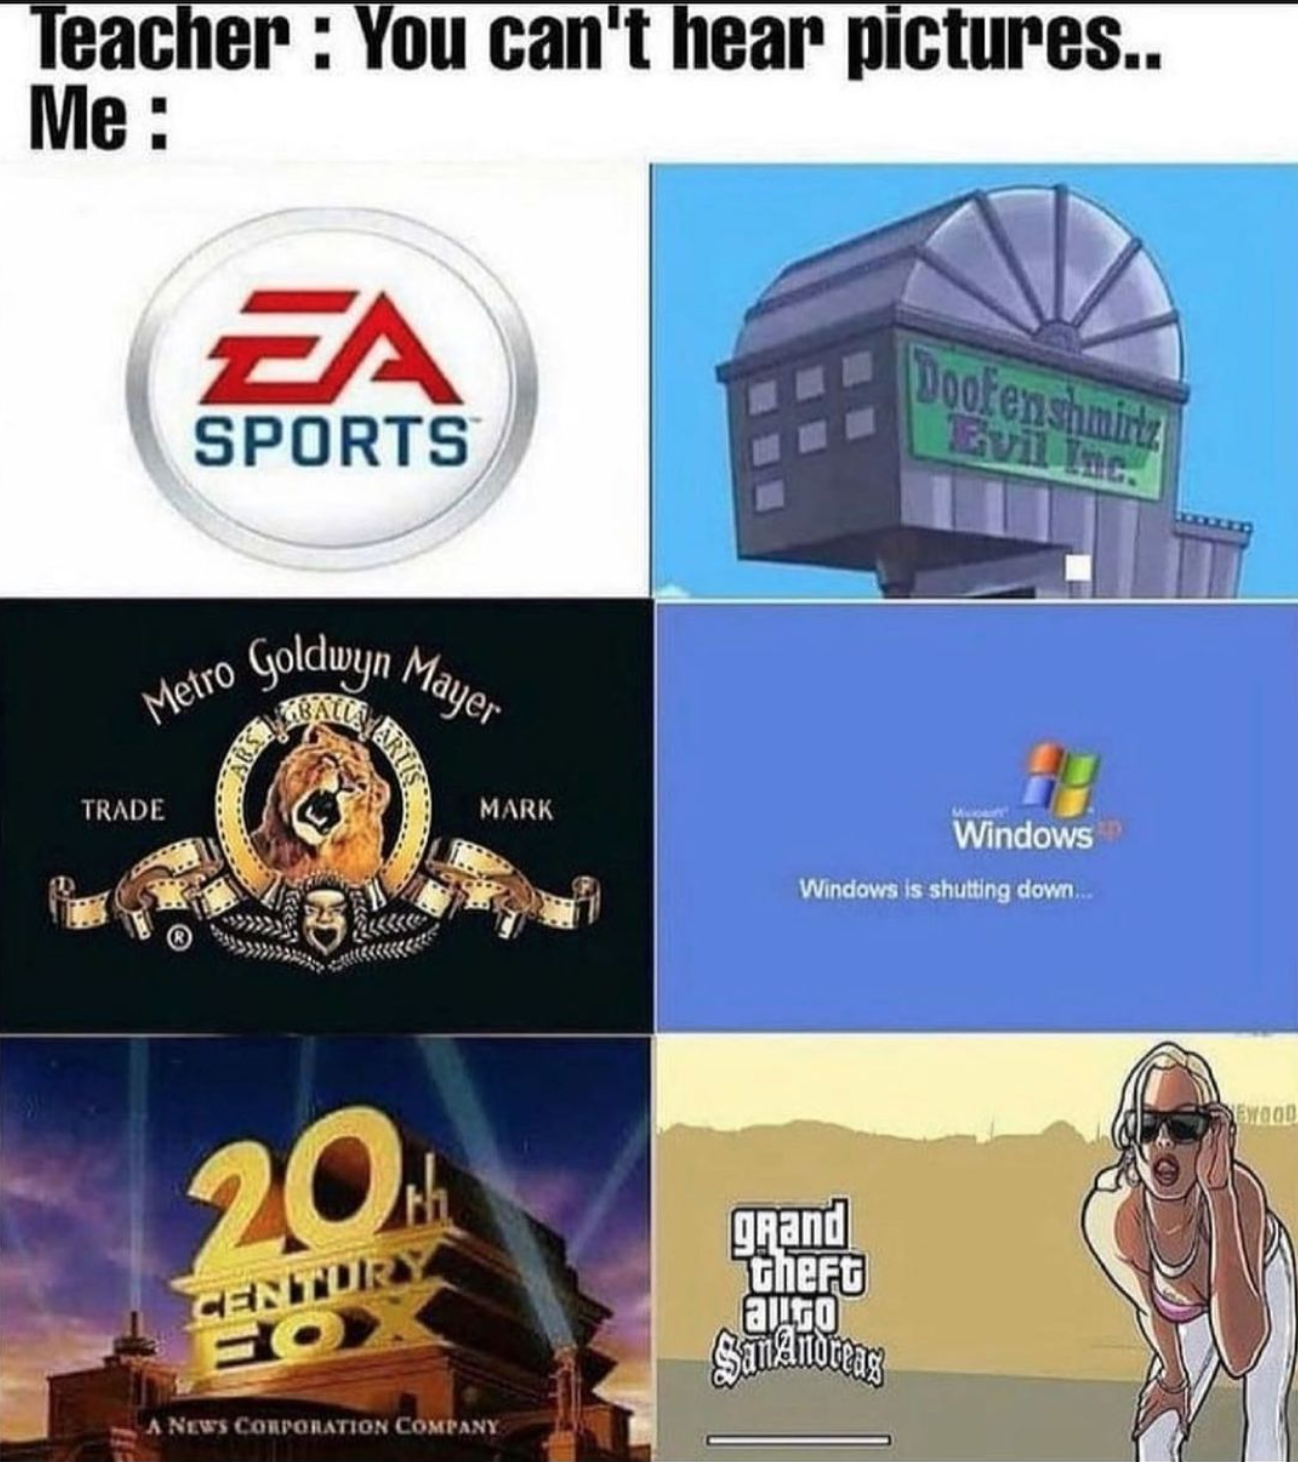 funny gaming memes - Teacher You can't hear pictures.. Me Doofenshine vil Inc. Sports Metro Goldwyn Mayer Mince Trade Mark Windows Windows in shutting down 2011 grand TheFC alito Genitory Eo A News Corporation Company